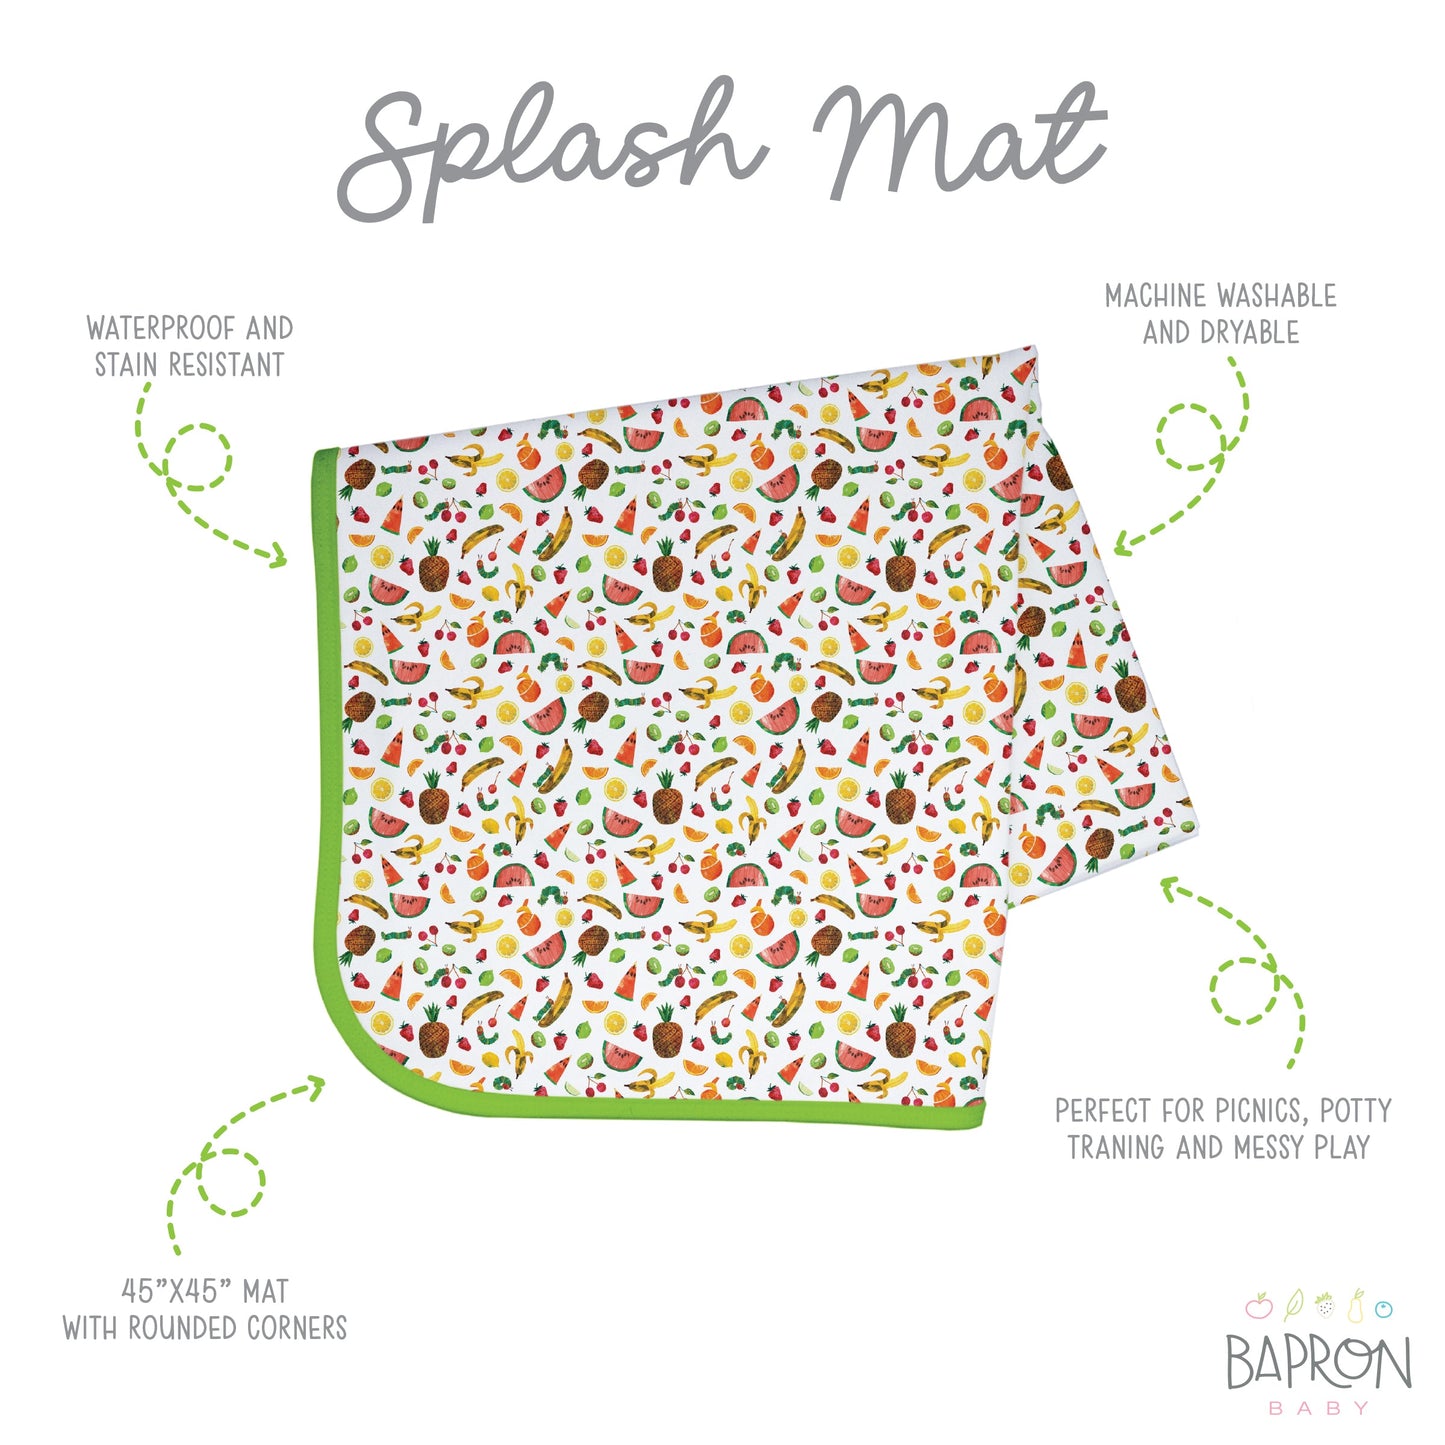 Tropical Fruit Splash Mat - from the World Of Eric Carle - A Waterproof Catch-All for Highchair Spills and More! - WERONE